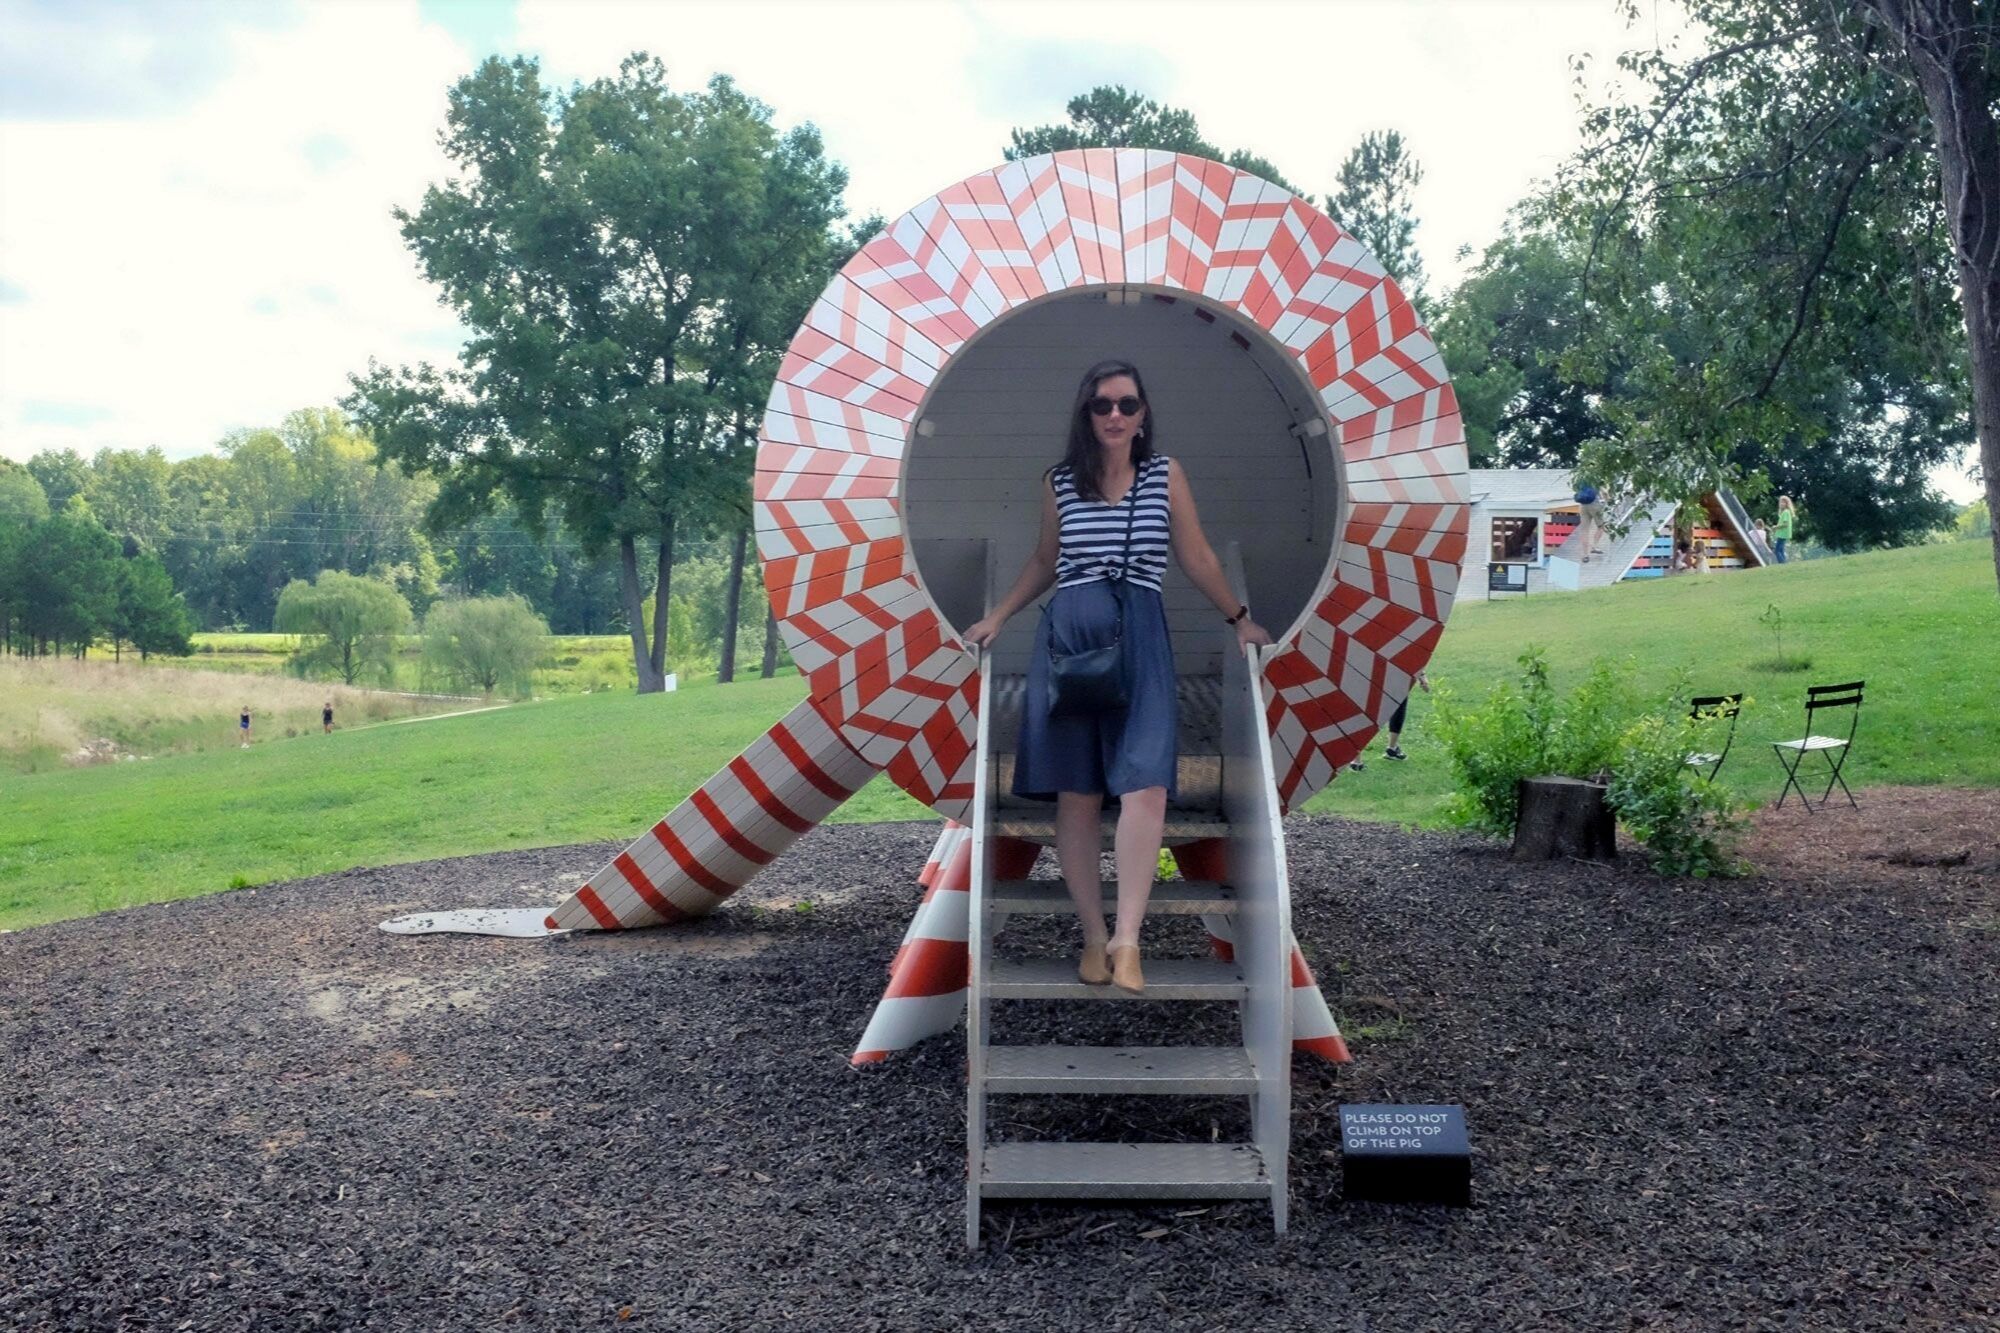 Alyssa standing in a wooden pig-shaped sculpture in Raleigh